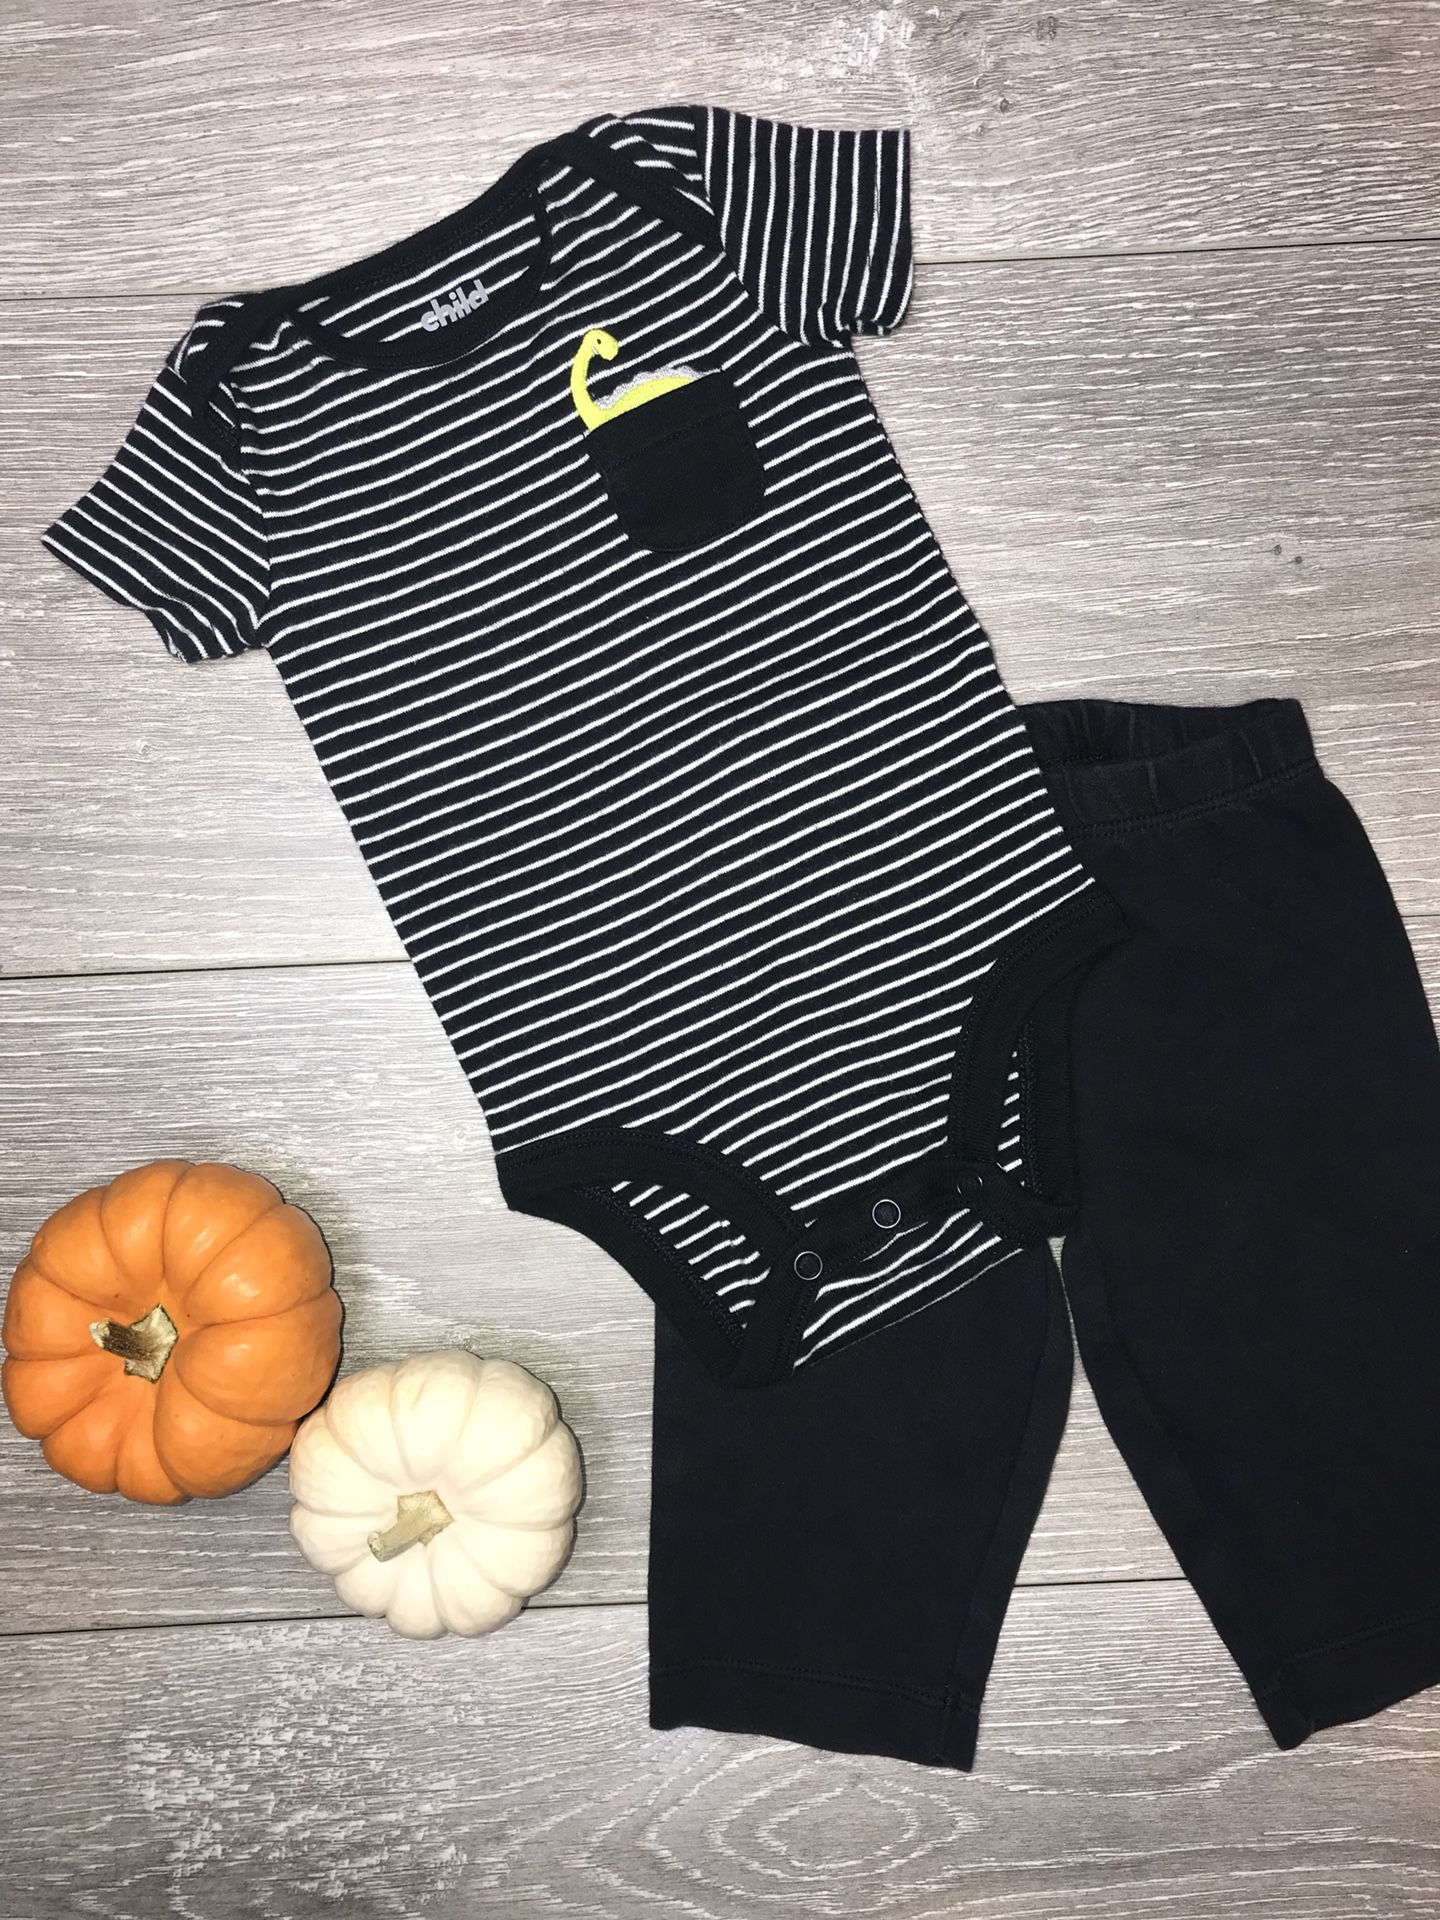 Baby Boy Clothing 3 Months $3